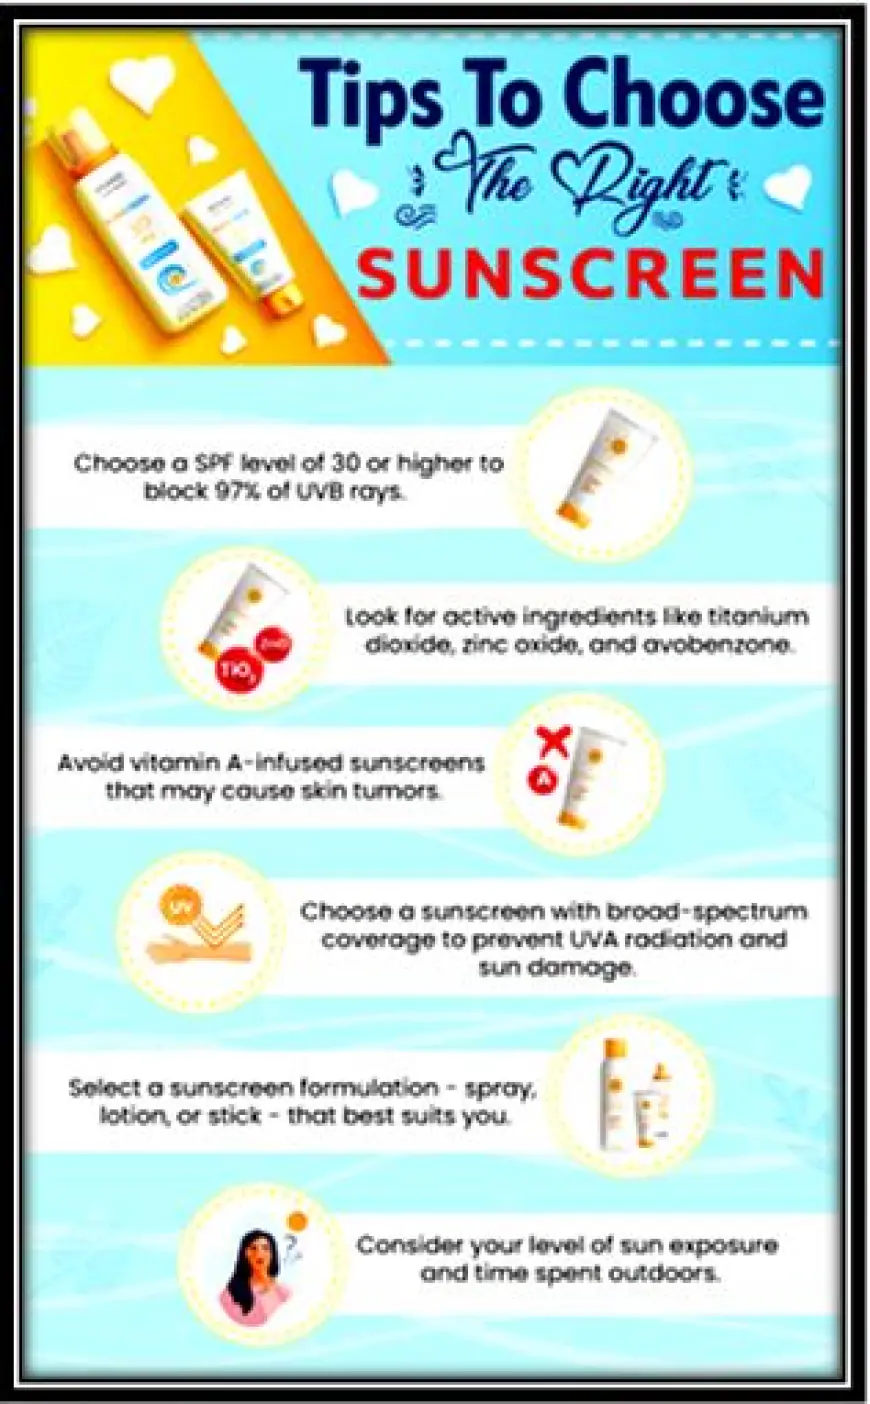 What Features to Look for in a Good Sunscreen Cream?